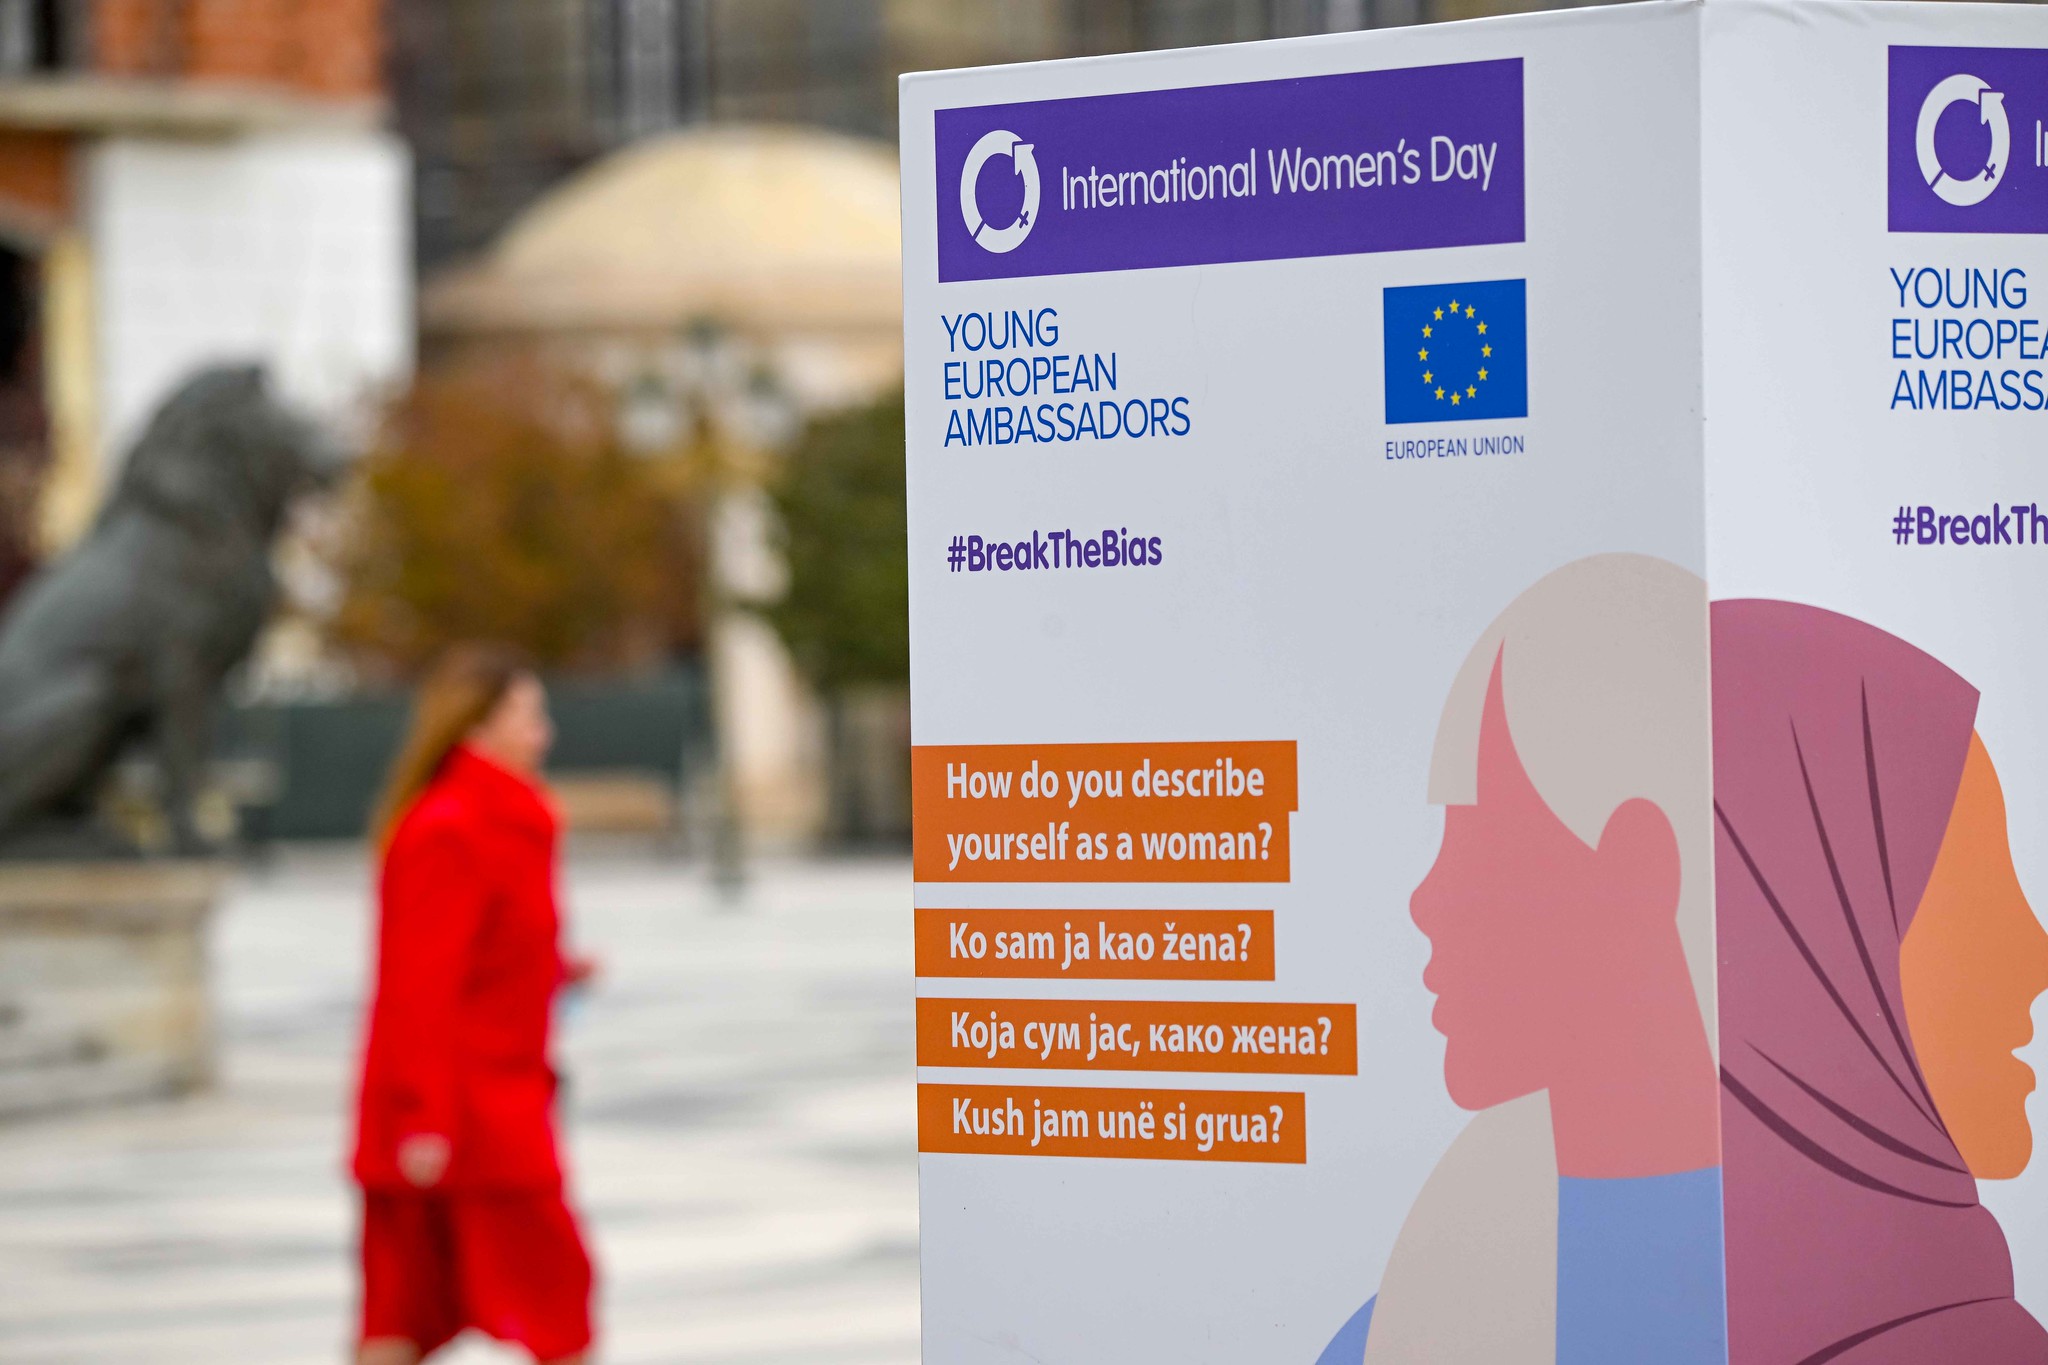 An International Women's Day marker in Skopje, North Macedonia, on 8 March 2022. (<a href="https://flic.kr/p/2n99Hgm" target="_blank">Photo</a> by WeBalkans EU / <a href="https://creativecommons.org/licenses/by/2.0/" target="_blank">CC BY 2.0</a>)